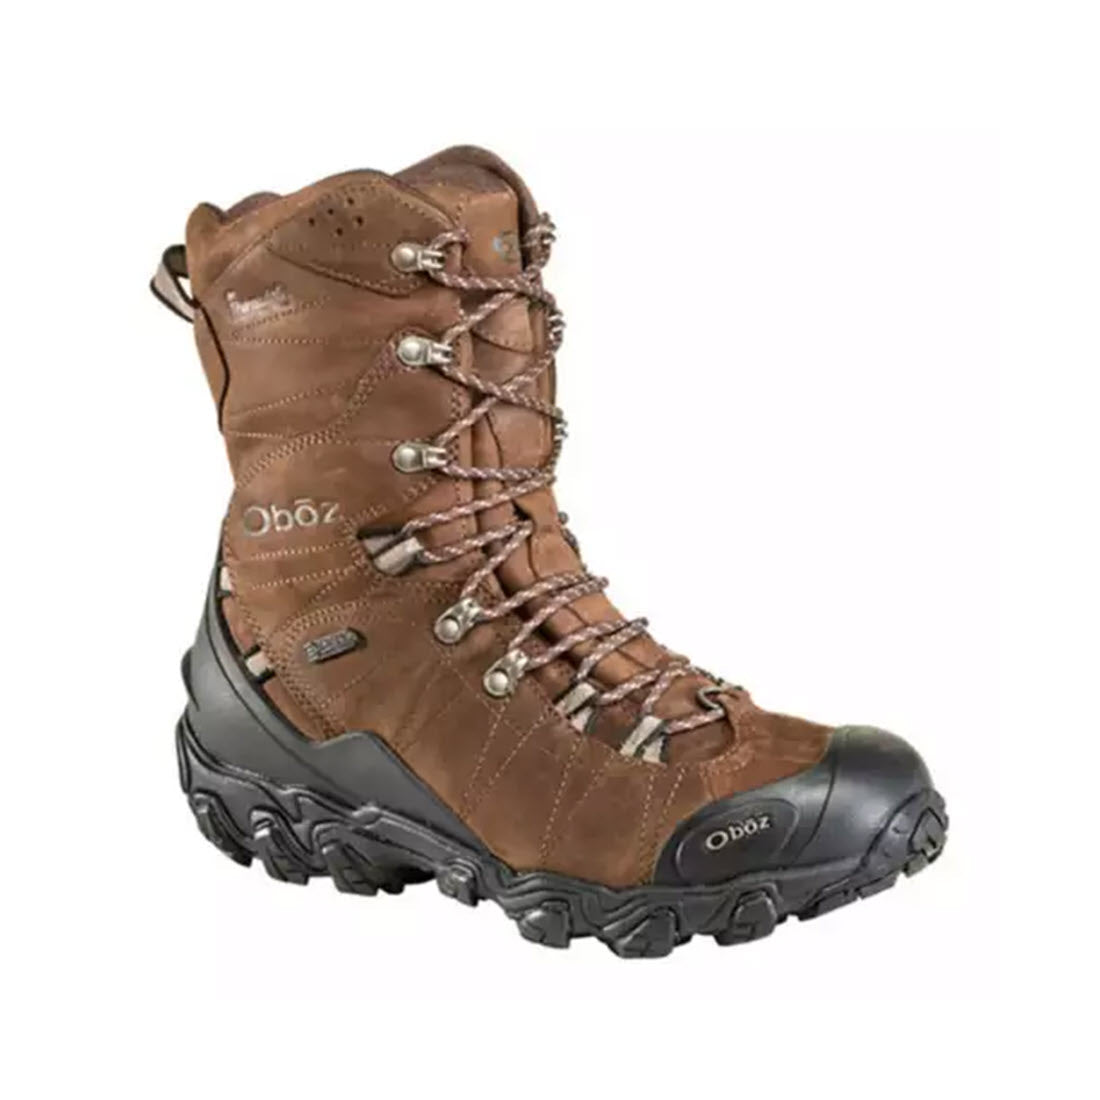 A single brown OBOZ BRIDGER 10&quot; INSULATED B-DRY BARK - MENS hiking boot with a high ankle design and cold-traction optimized rubber tread, isolated on a white background.